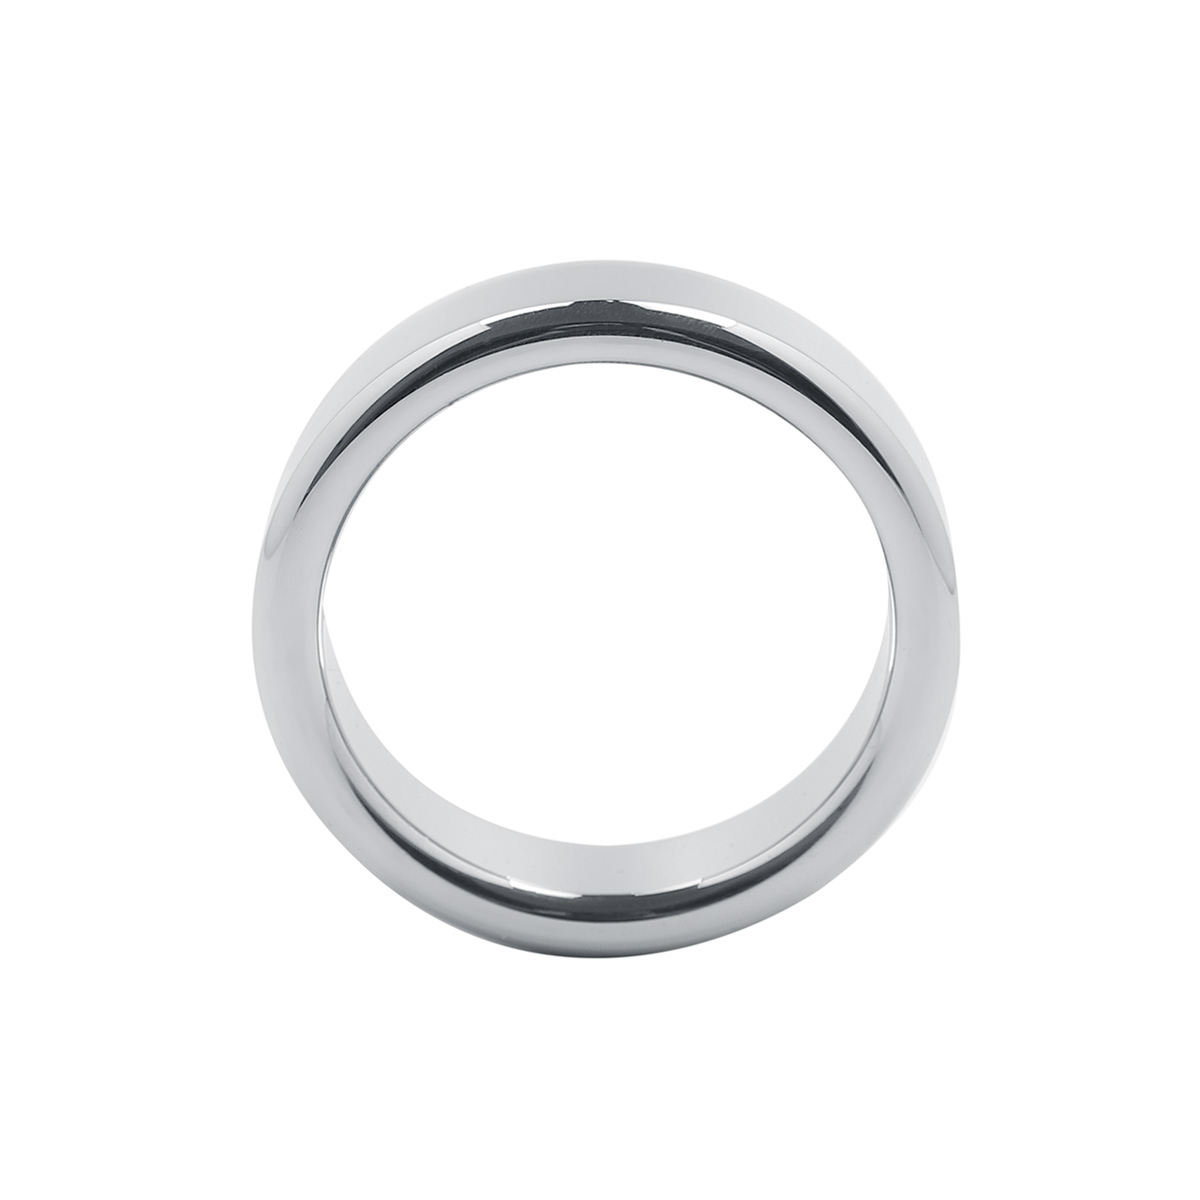 Cockring-4-mm-x-12-mm-52.5-mm-112-TBJ-2052-4-12-52.5-2